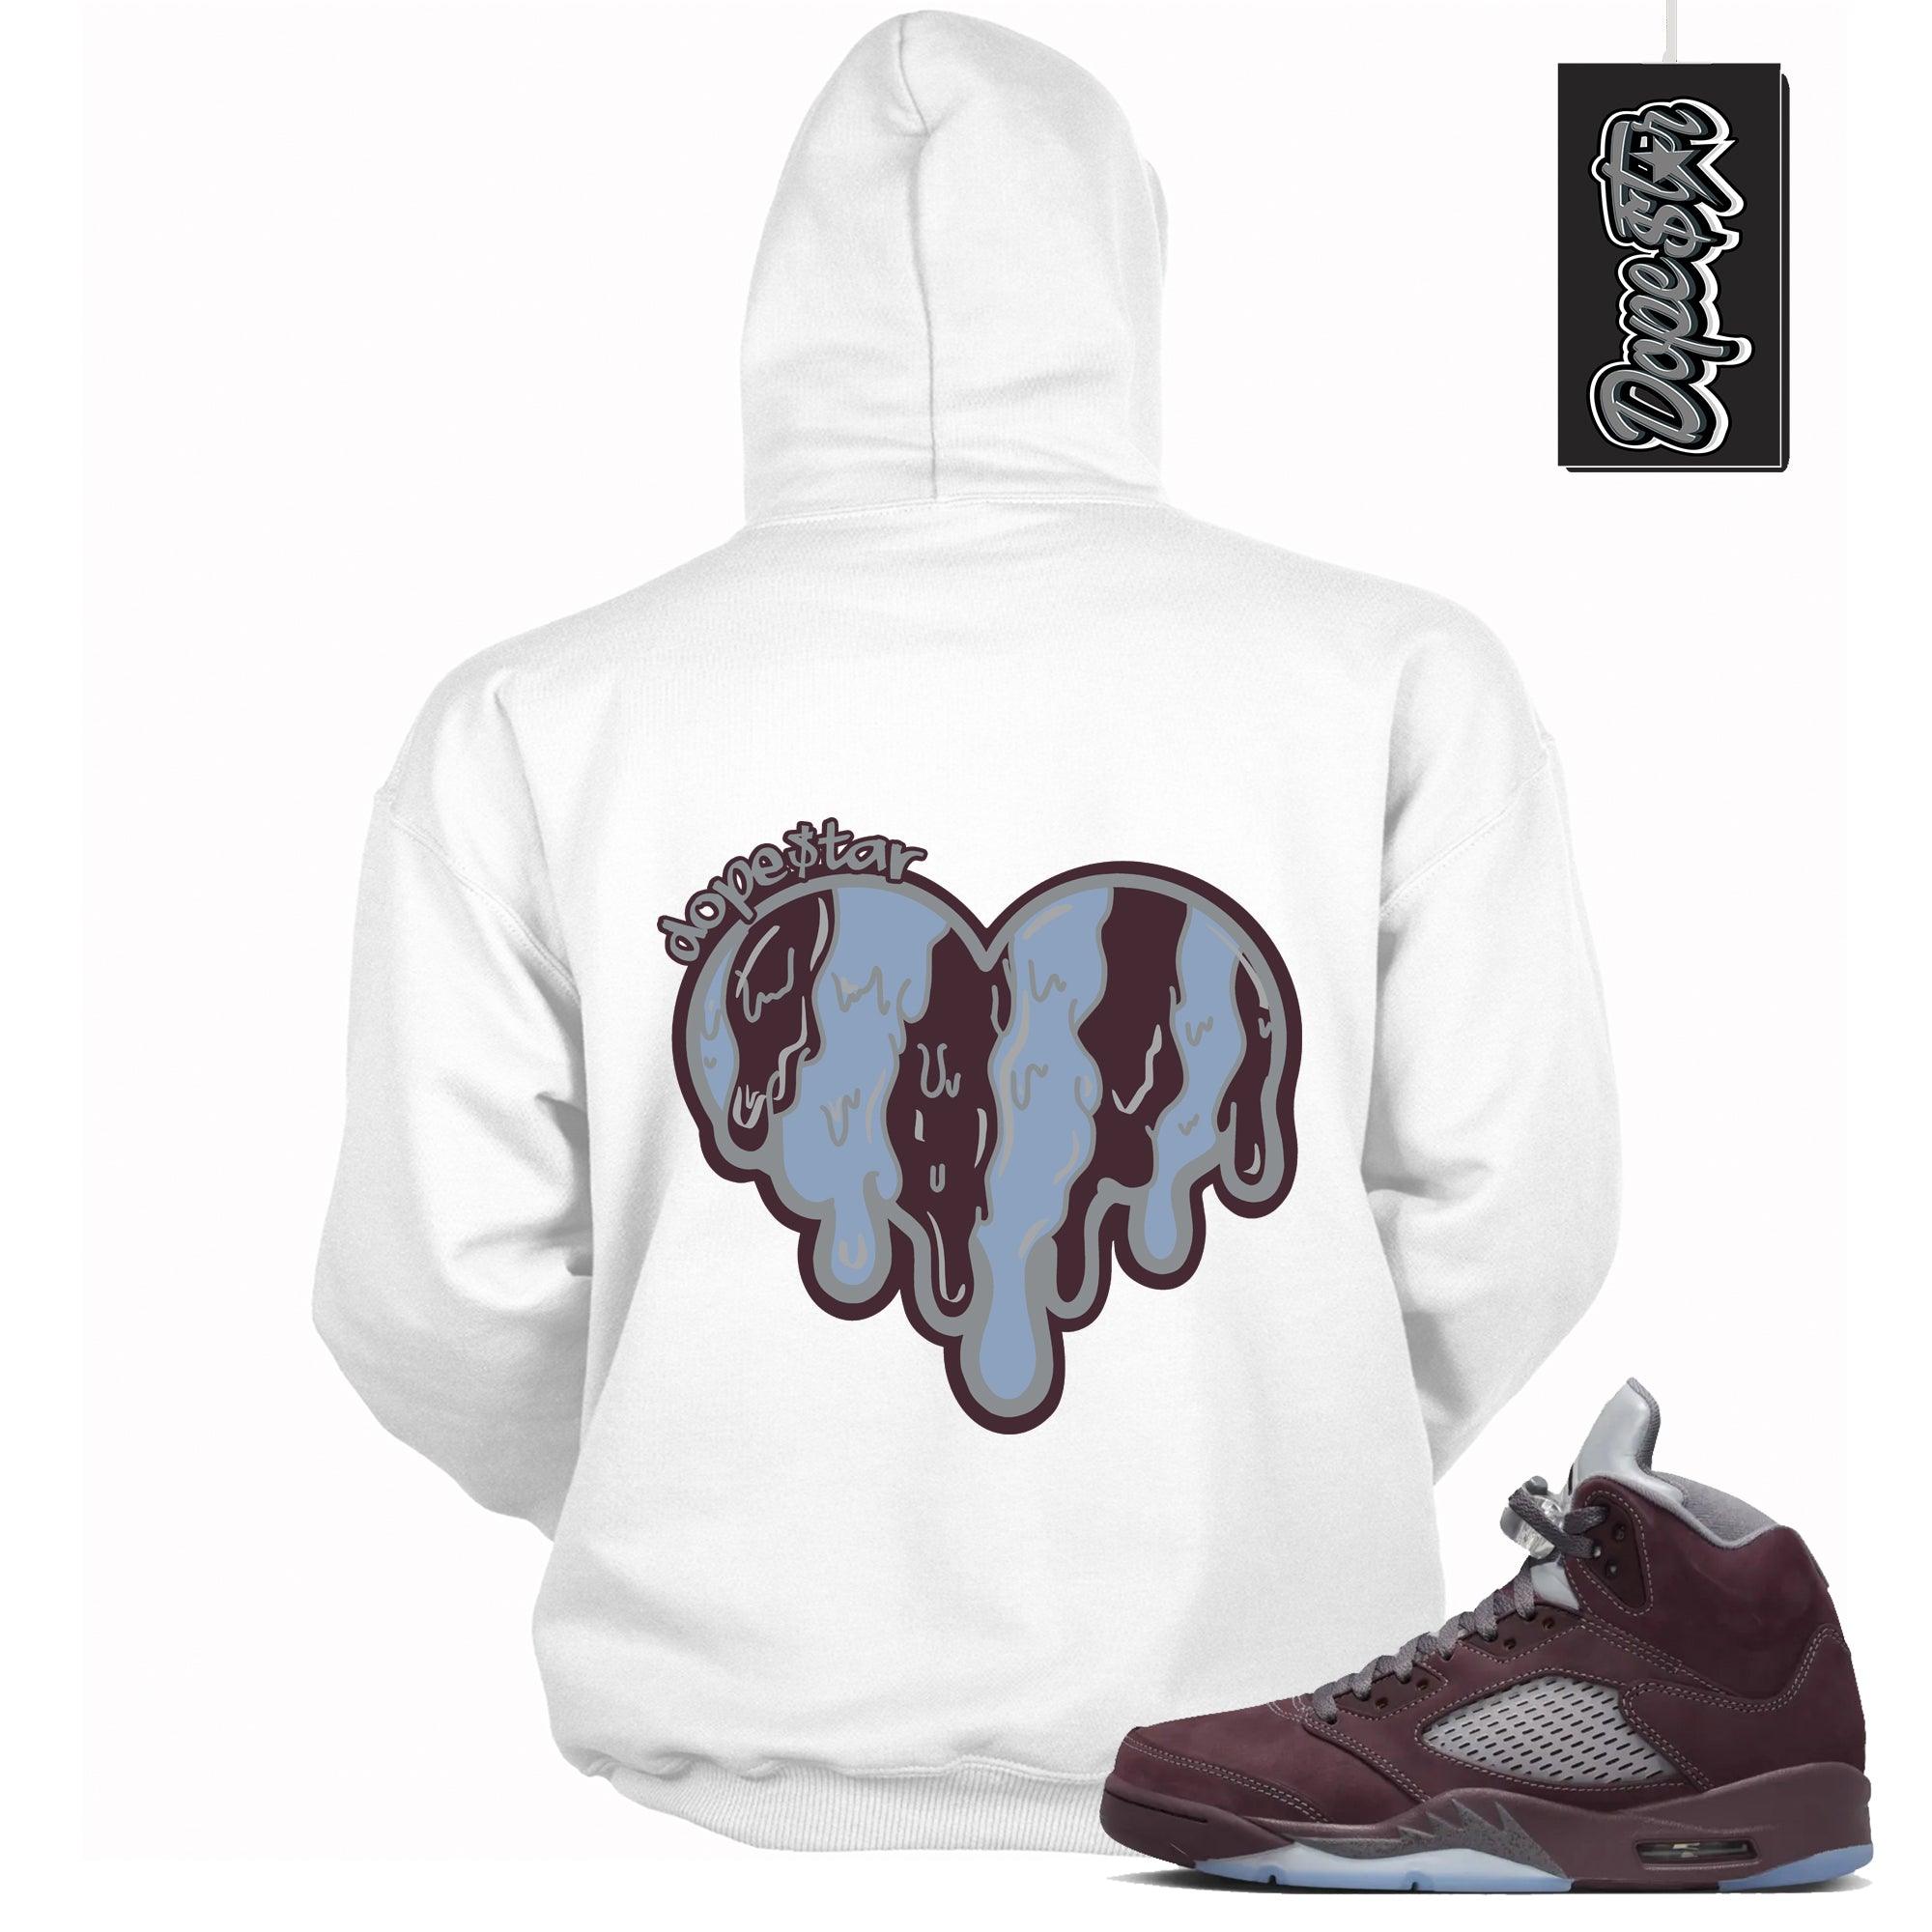 Cool White Graphic Hoodie with “ Melting Heart “ print, that perfectly matches Air Jordan 5 Burgundy 2023 sneakers